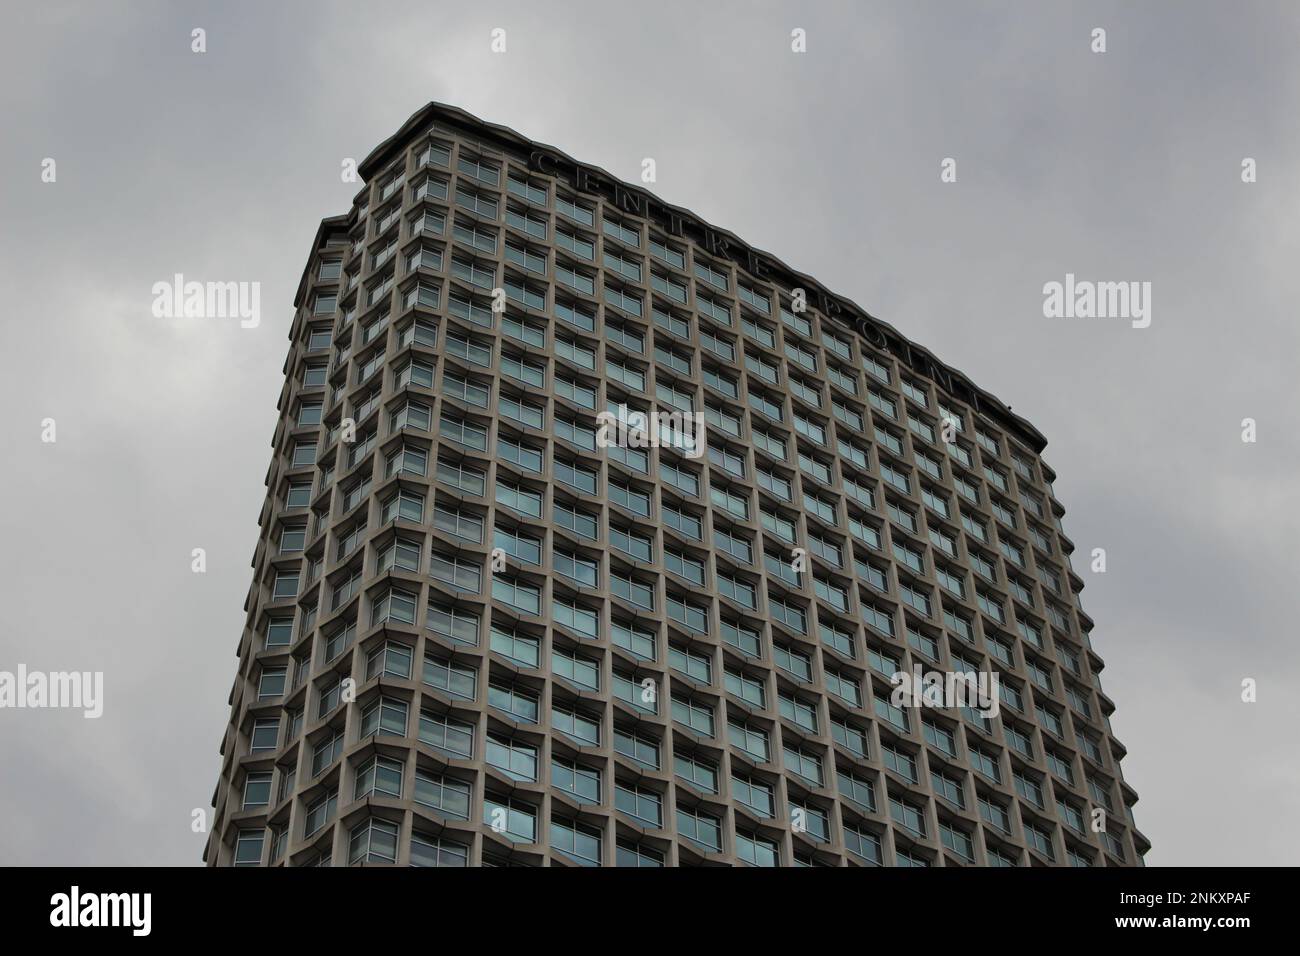 Low angle view of Centre Point Skyscraper in Central London on a typical overcast London Day. Grade II listed building, Modernist Architectural style Stock Photo